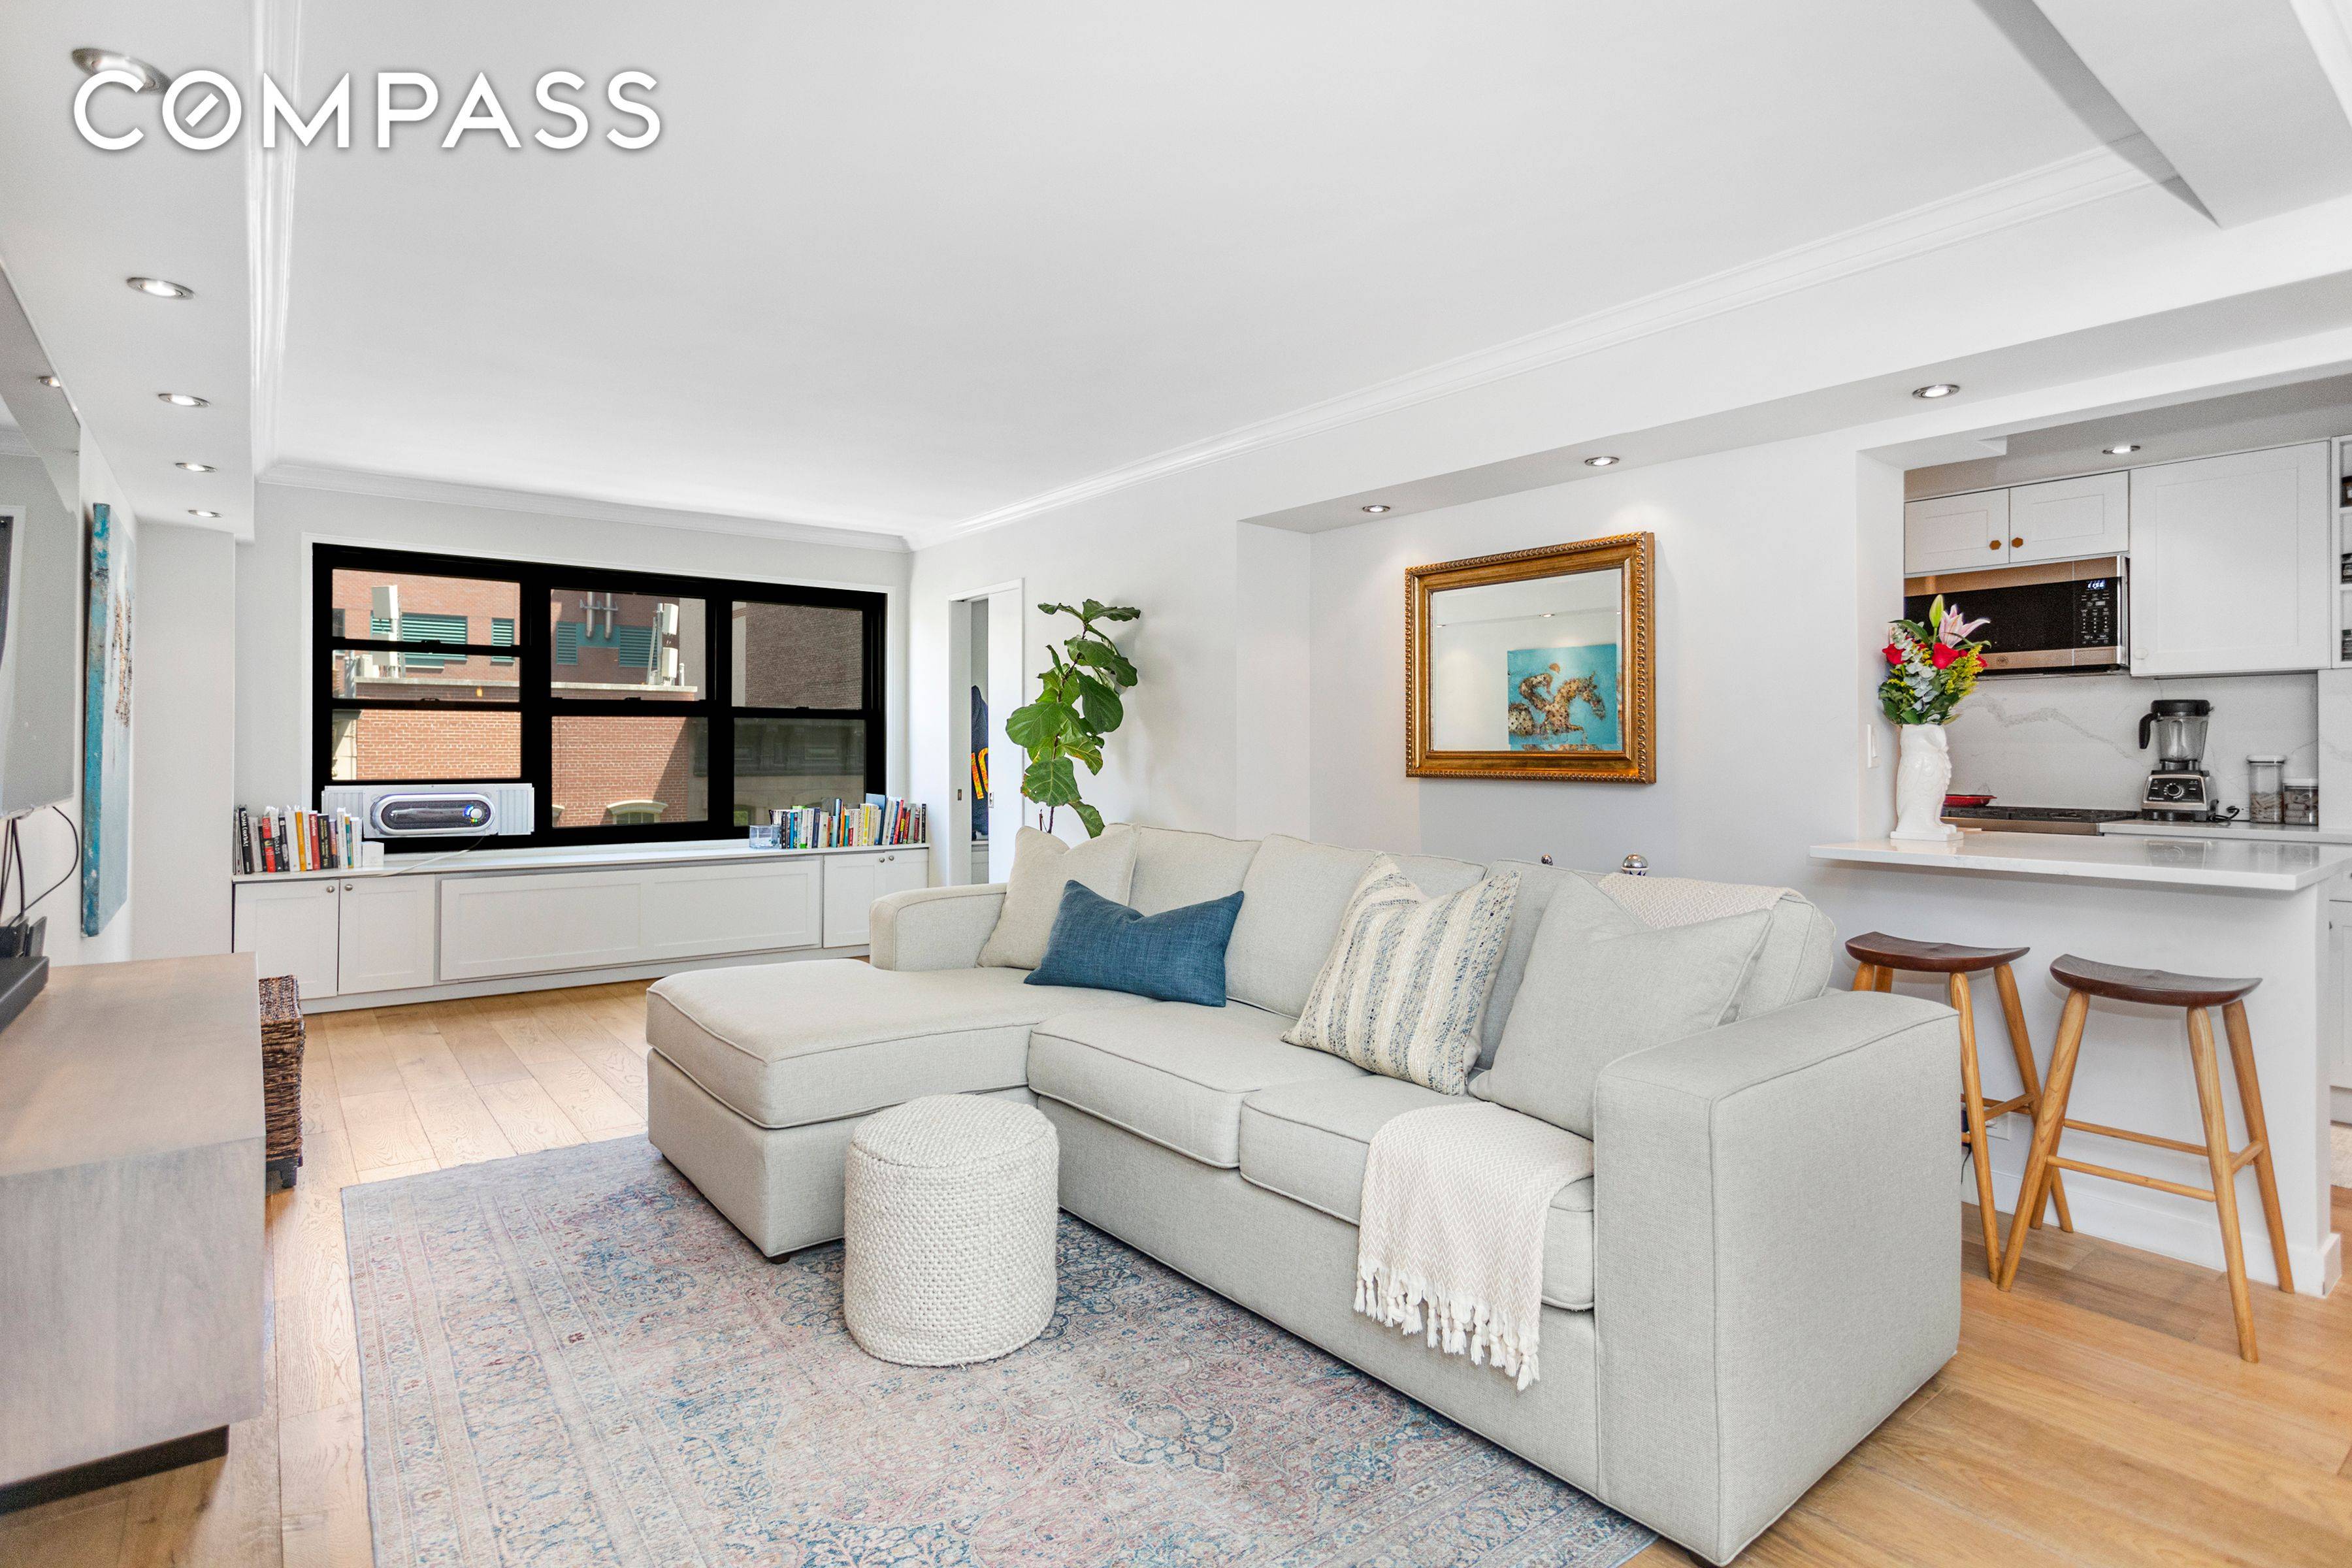 Find the perfect combination of style, comfort, and location in this 2 bed, 1 bath apartment at The Greenwich House on the border of Flatiron and Greenwich Village.